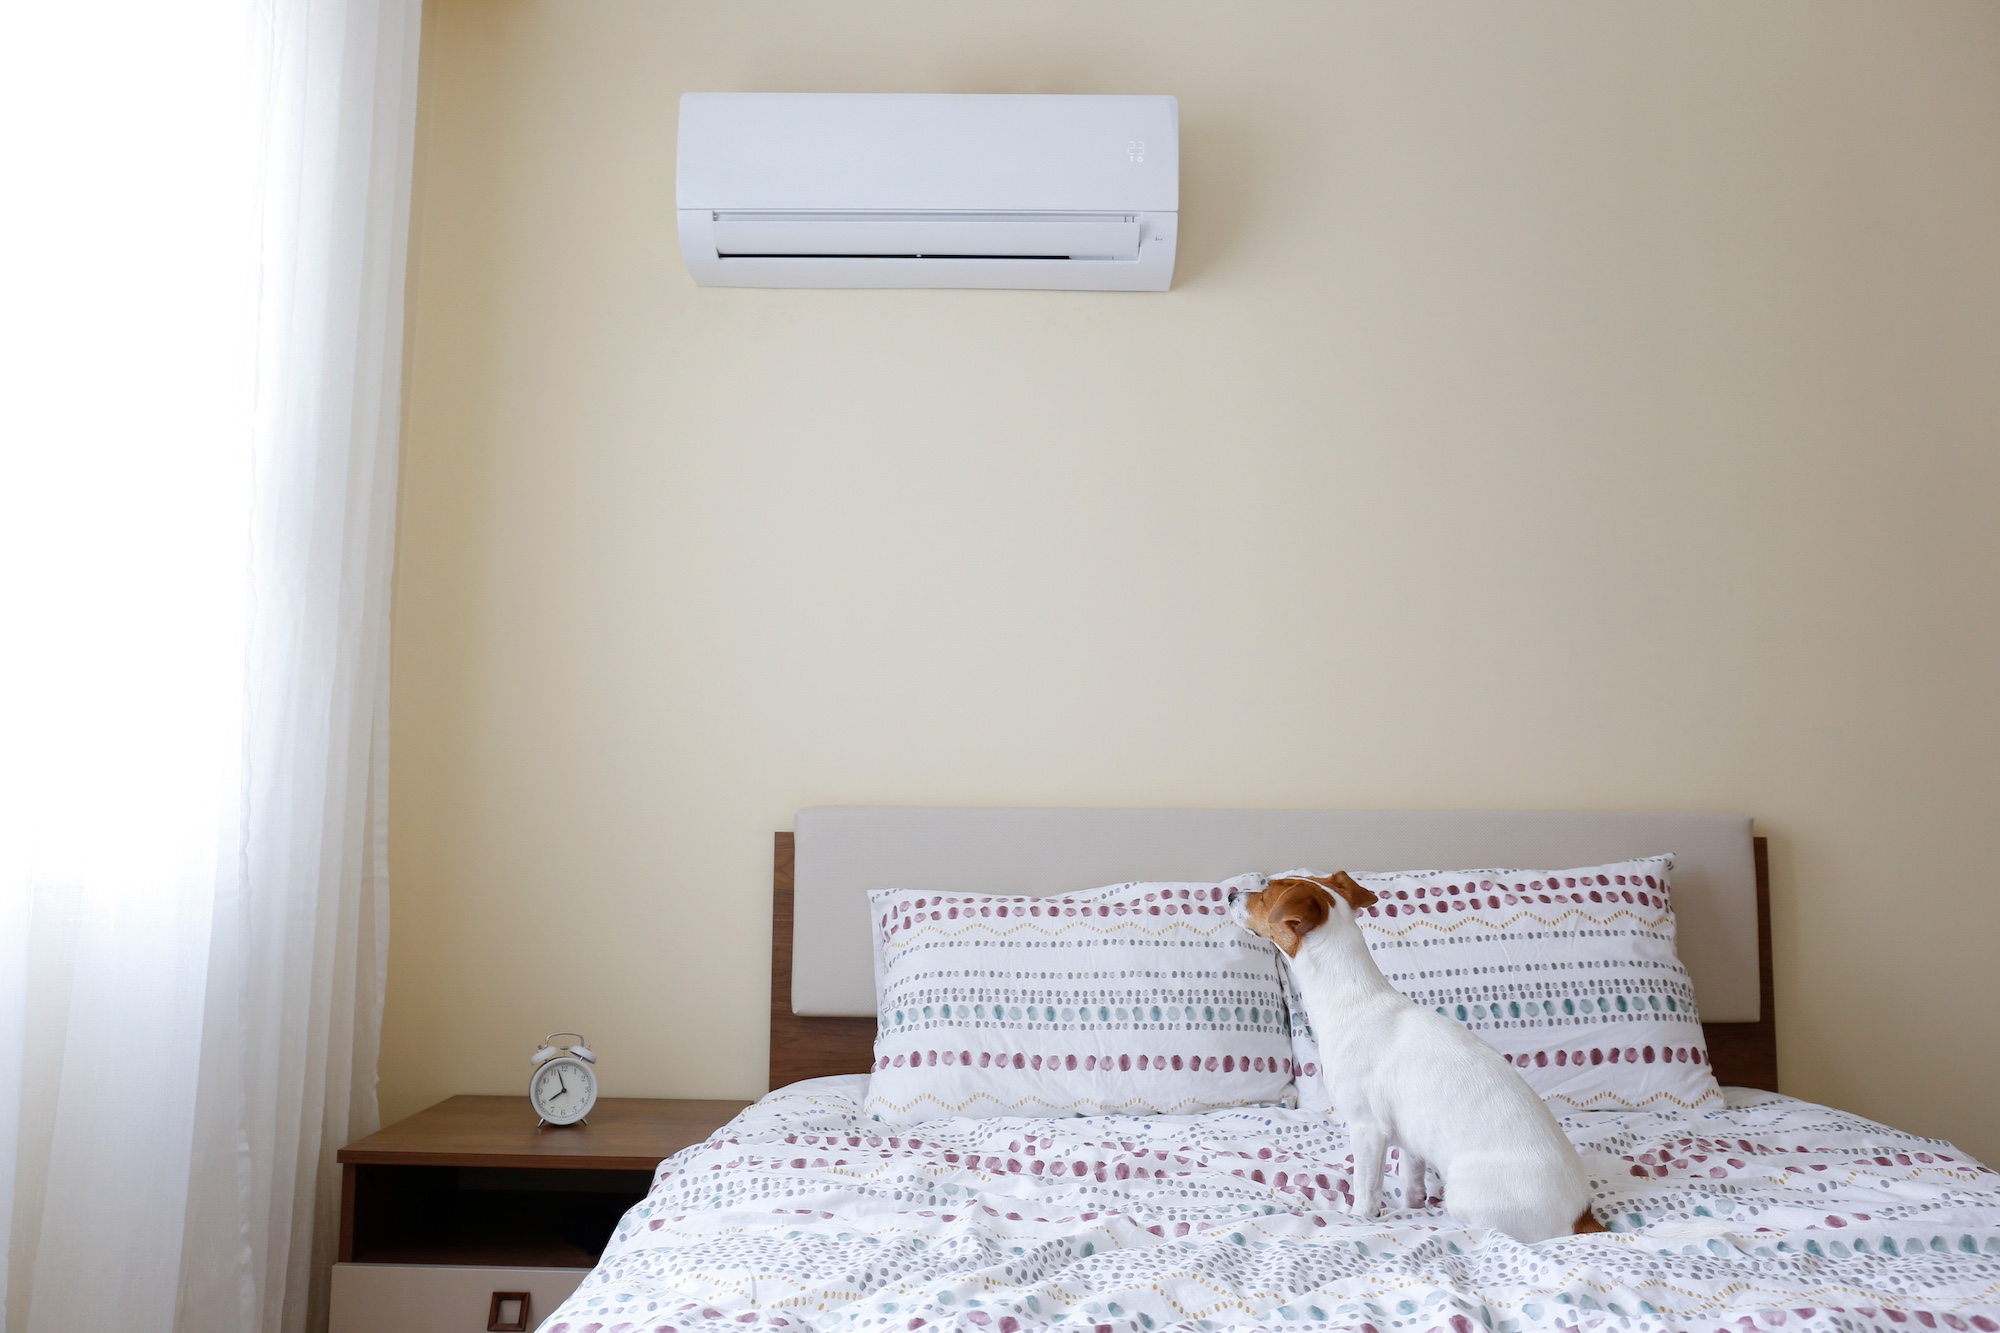 A Jack Russell terrier sitting on a bed near an air conditioner.